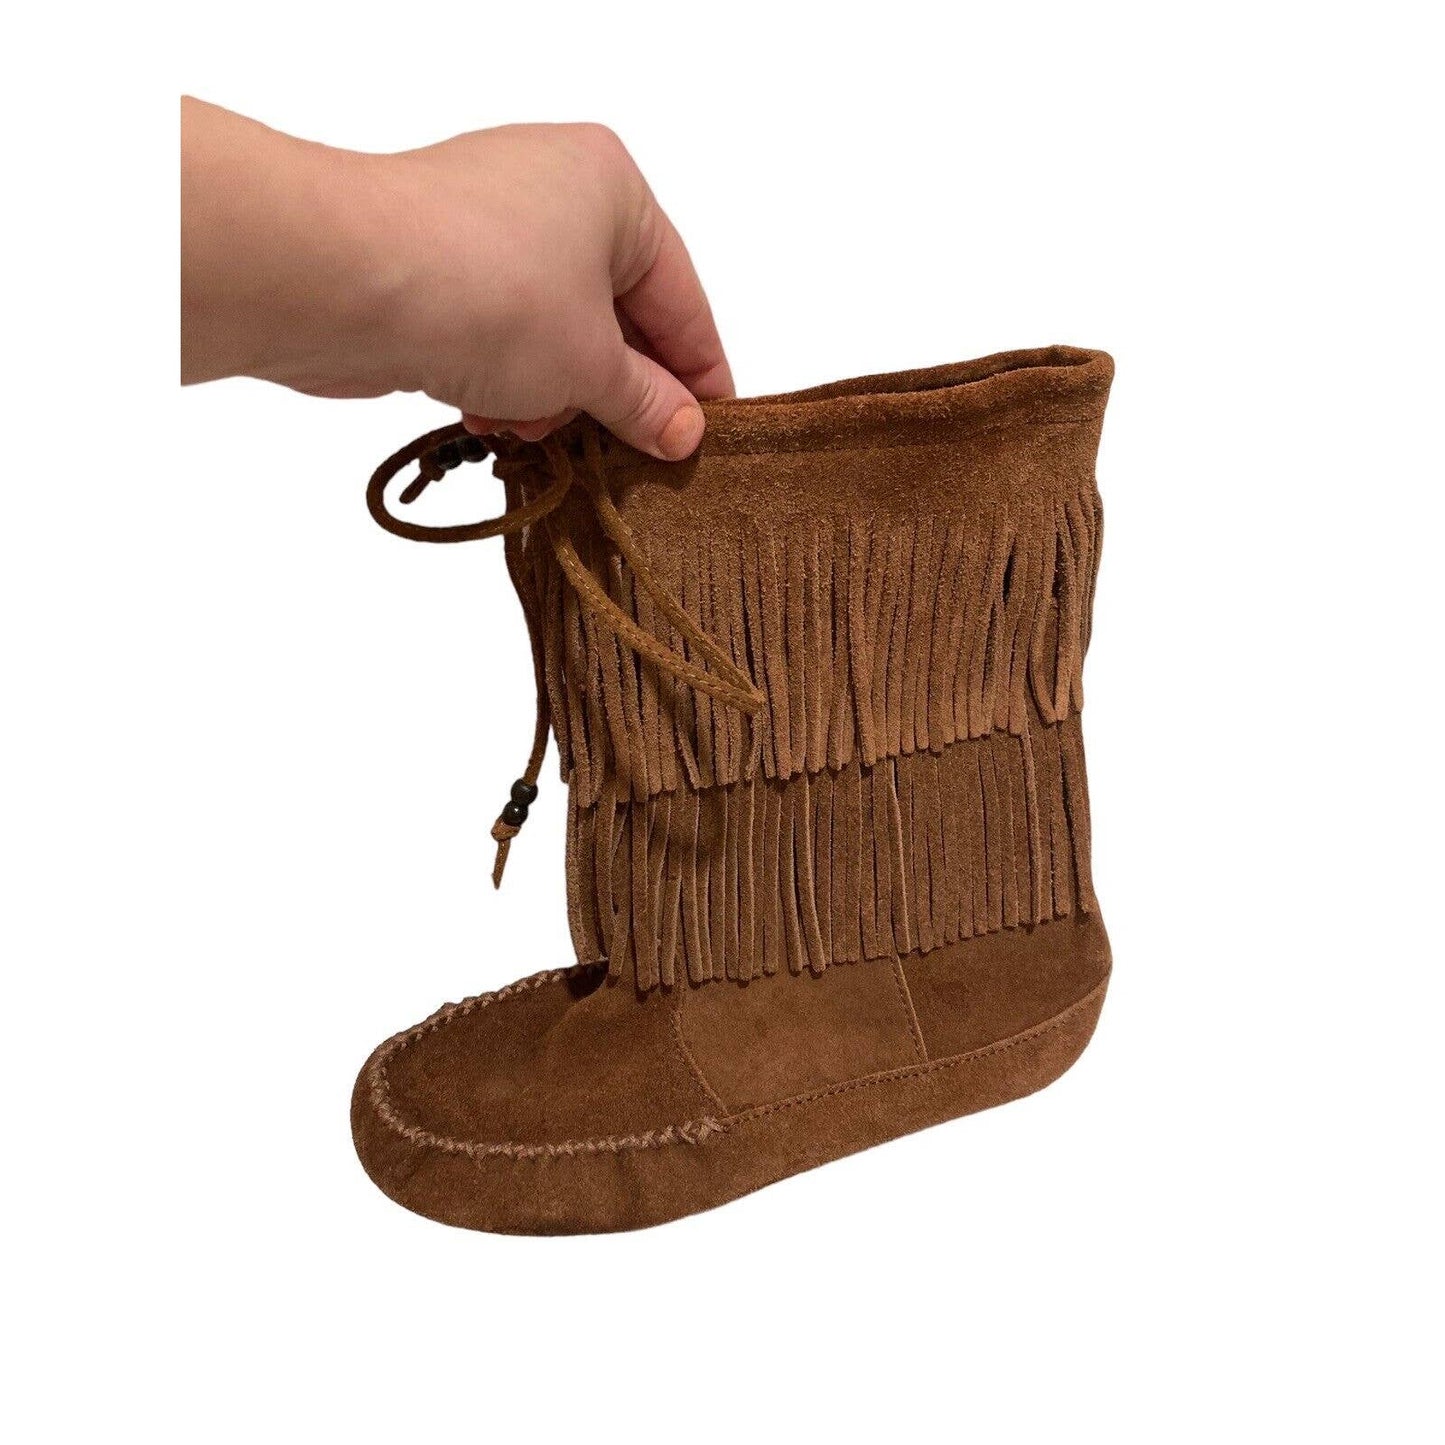 Minnetonka Boots Fringe Mid Calf Camel Leather Suede Round Moc Toe Tie Size 6.5